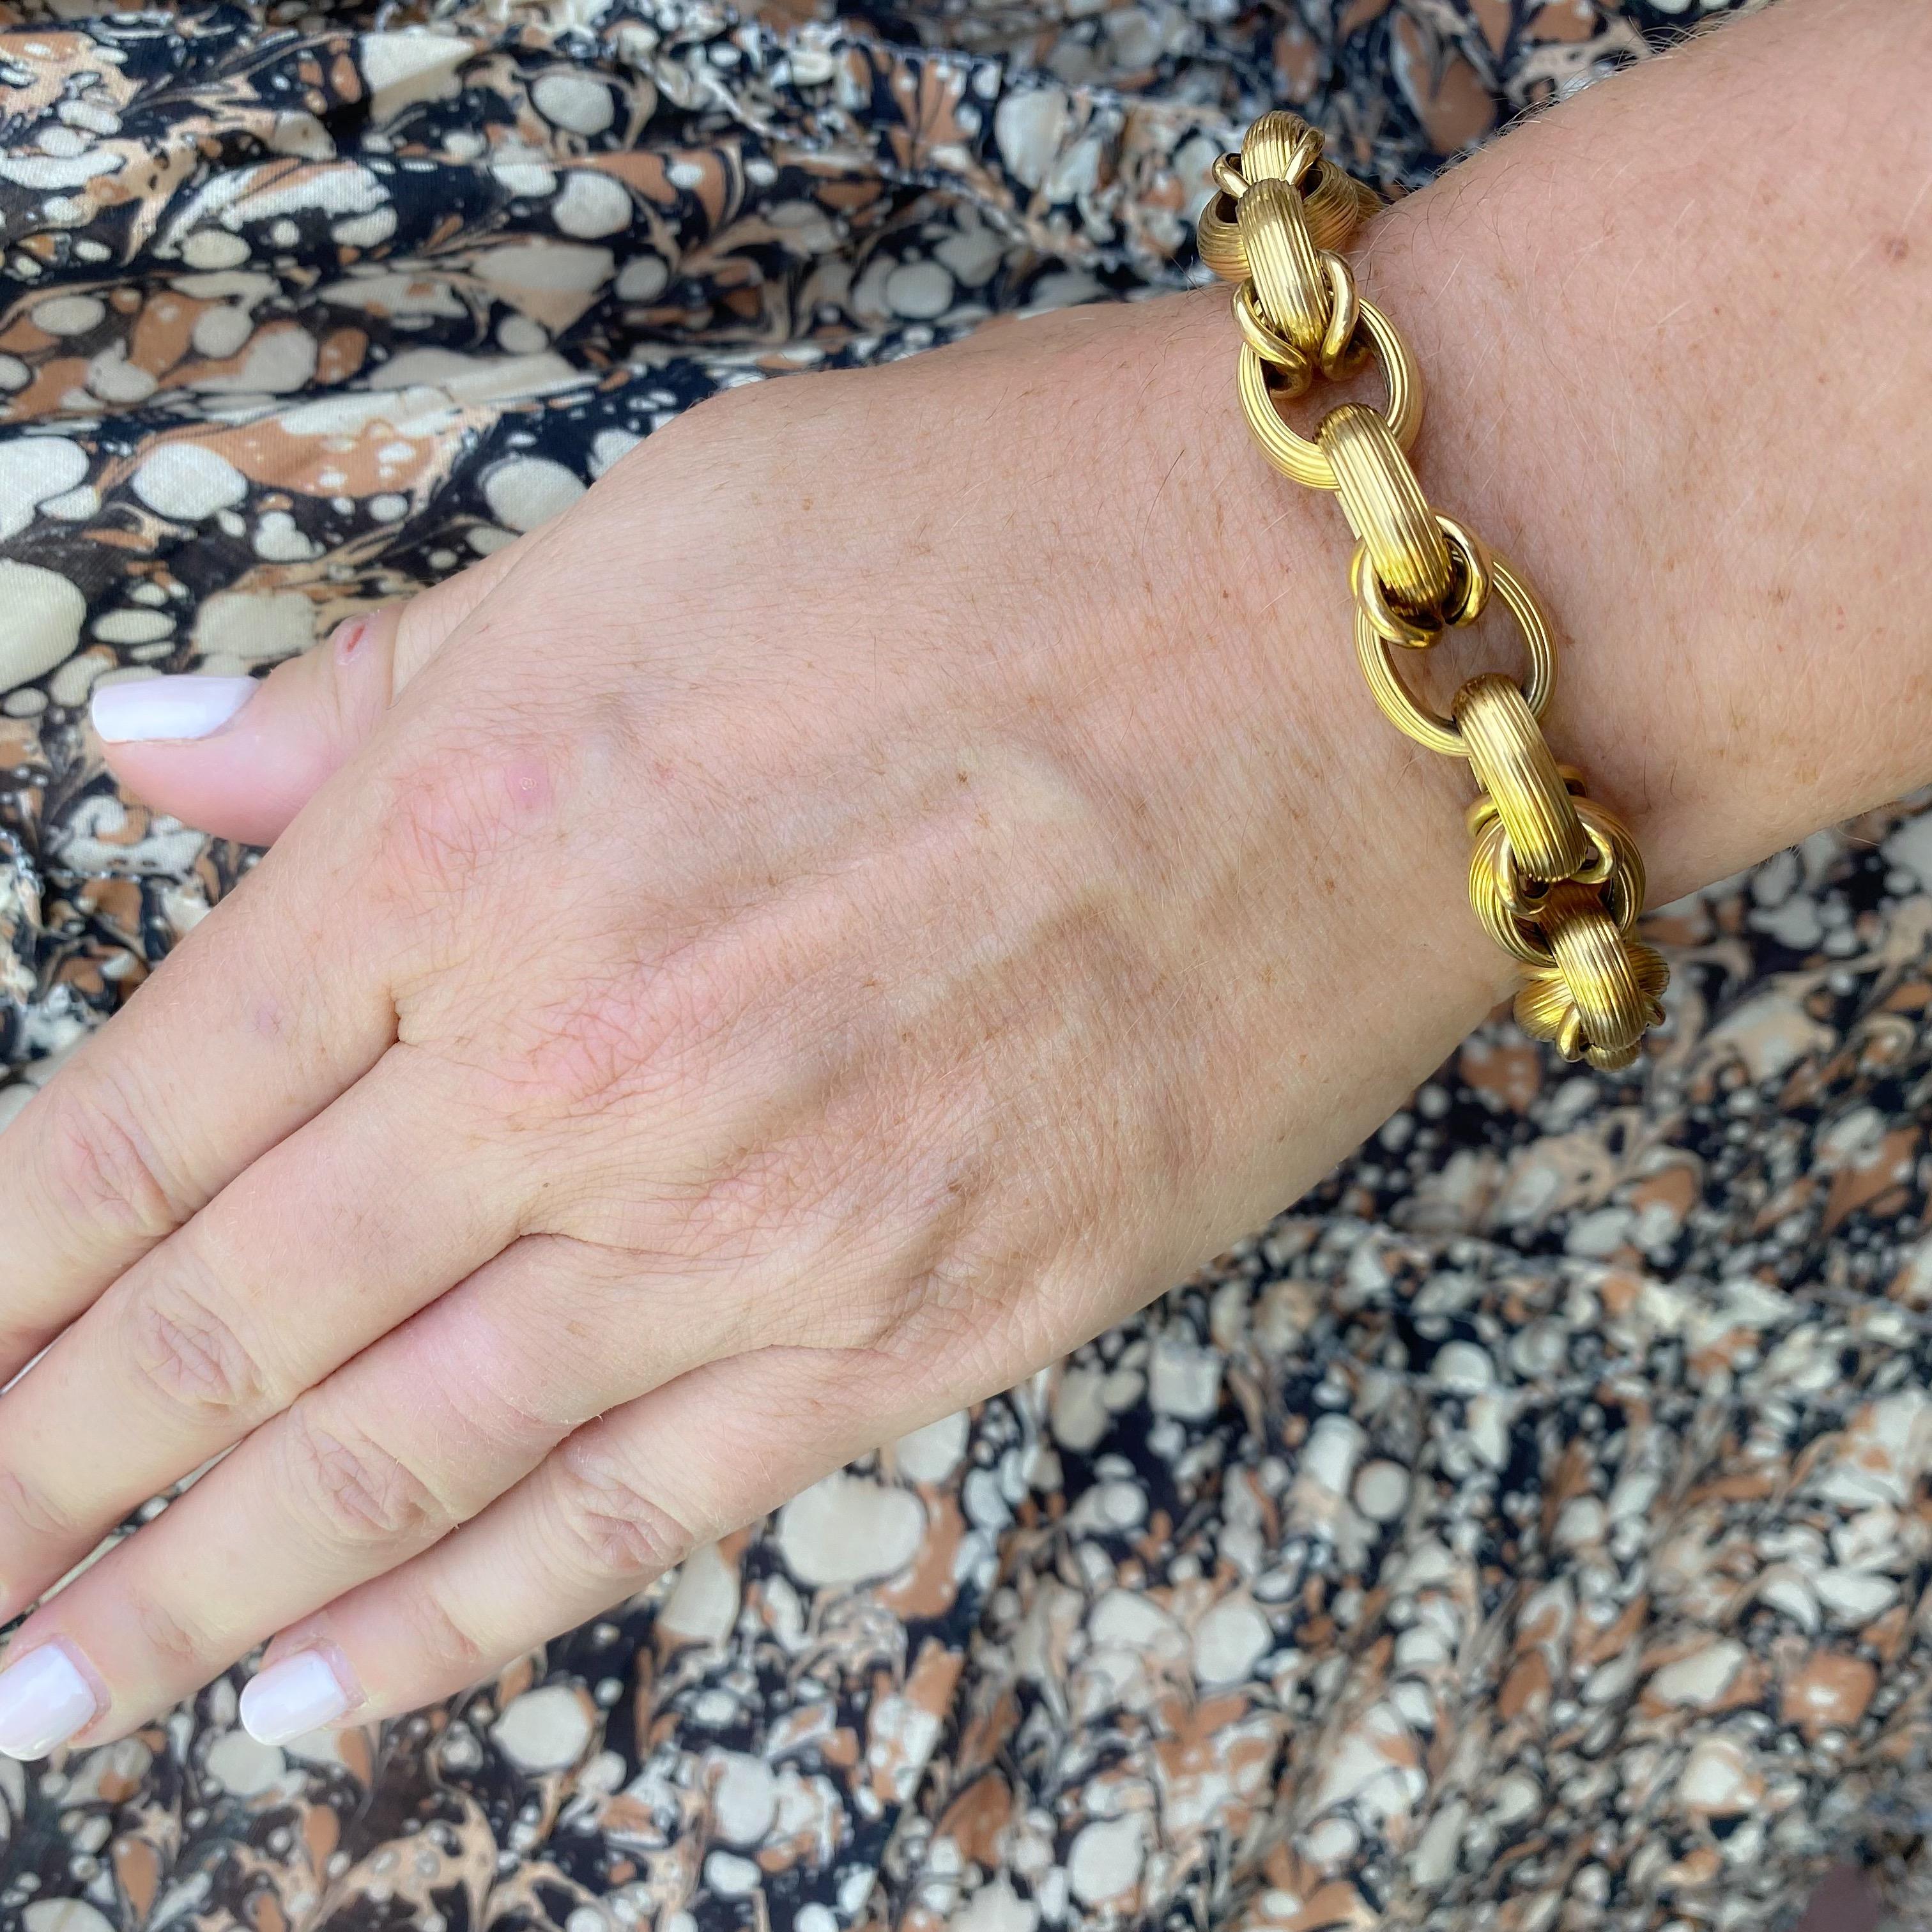 Fabulous 1970's Italian design! The oversize textured oval links with polished wire accents, the bracelet weighs 23.5 grams, and measures 8in. long. This bracelet is great to wear alone, or stacked for added flair.